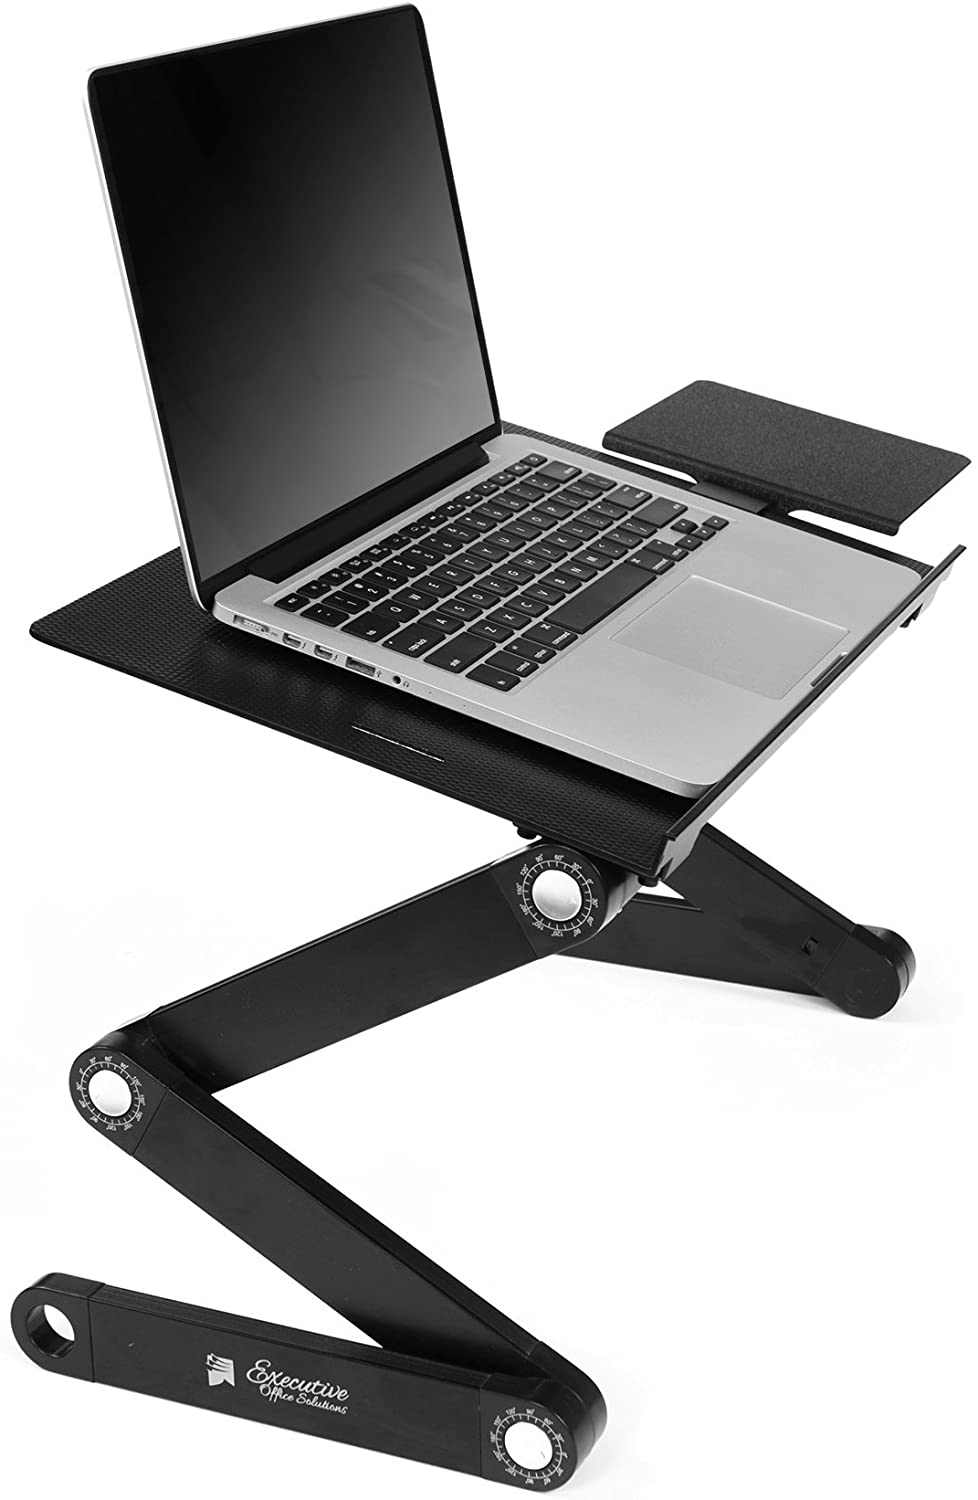 Portable Adjustable Aluminum Laptop Stand Vented with CPU Fans and Mouse Pad Side